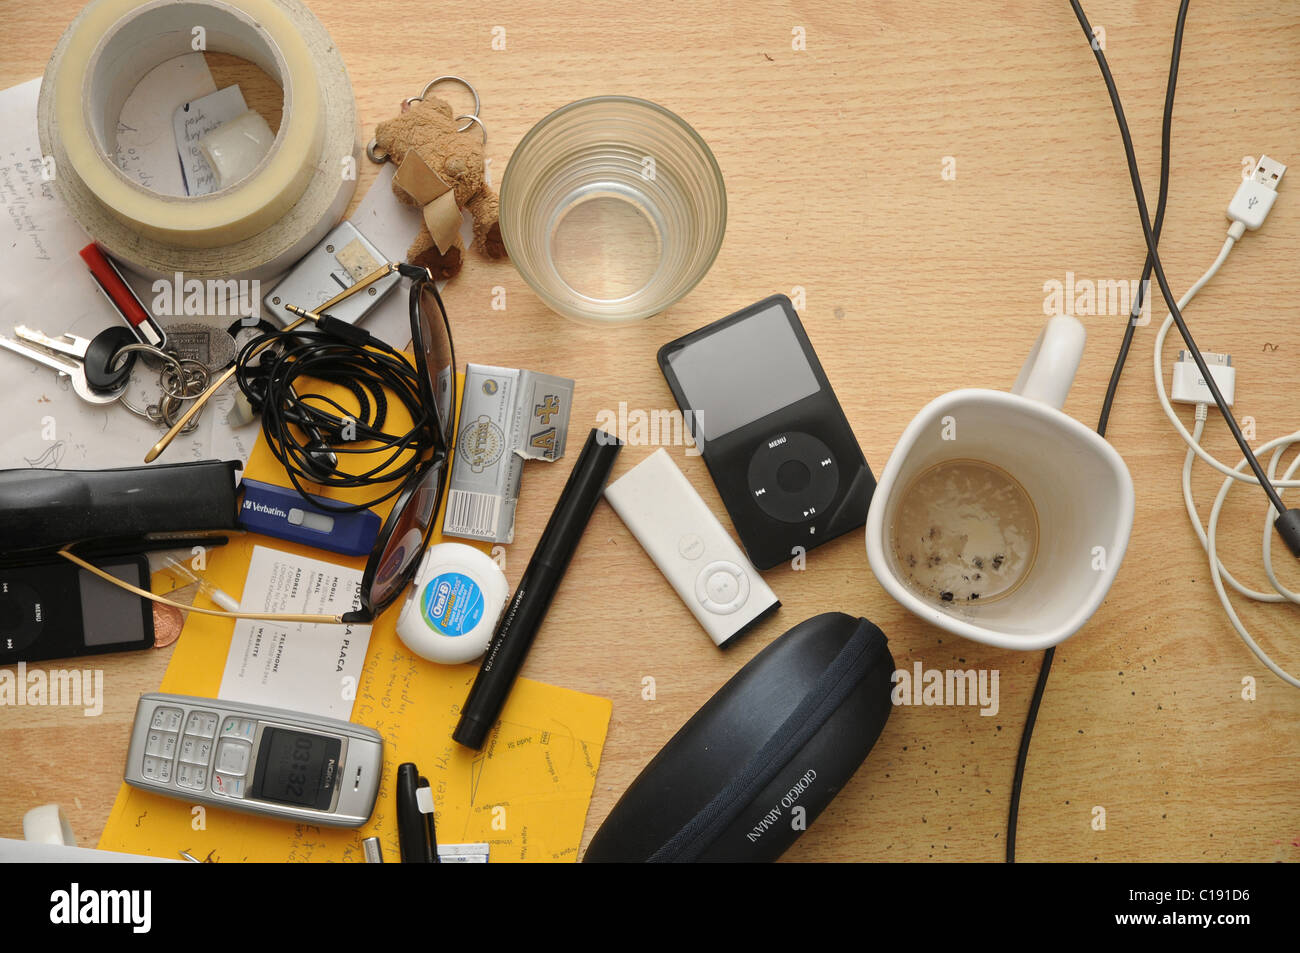 A perpendicular view of a messy desk surface with all sorts of stationary, electronics and dirty mugs. Stock Photo